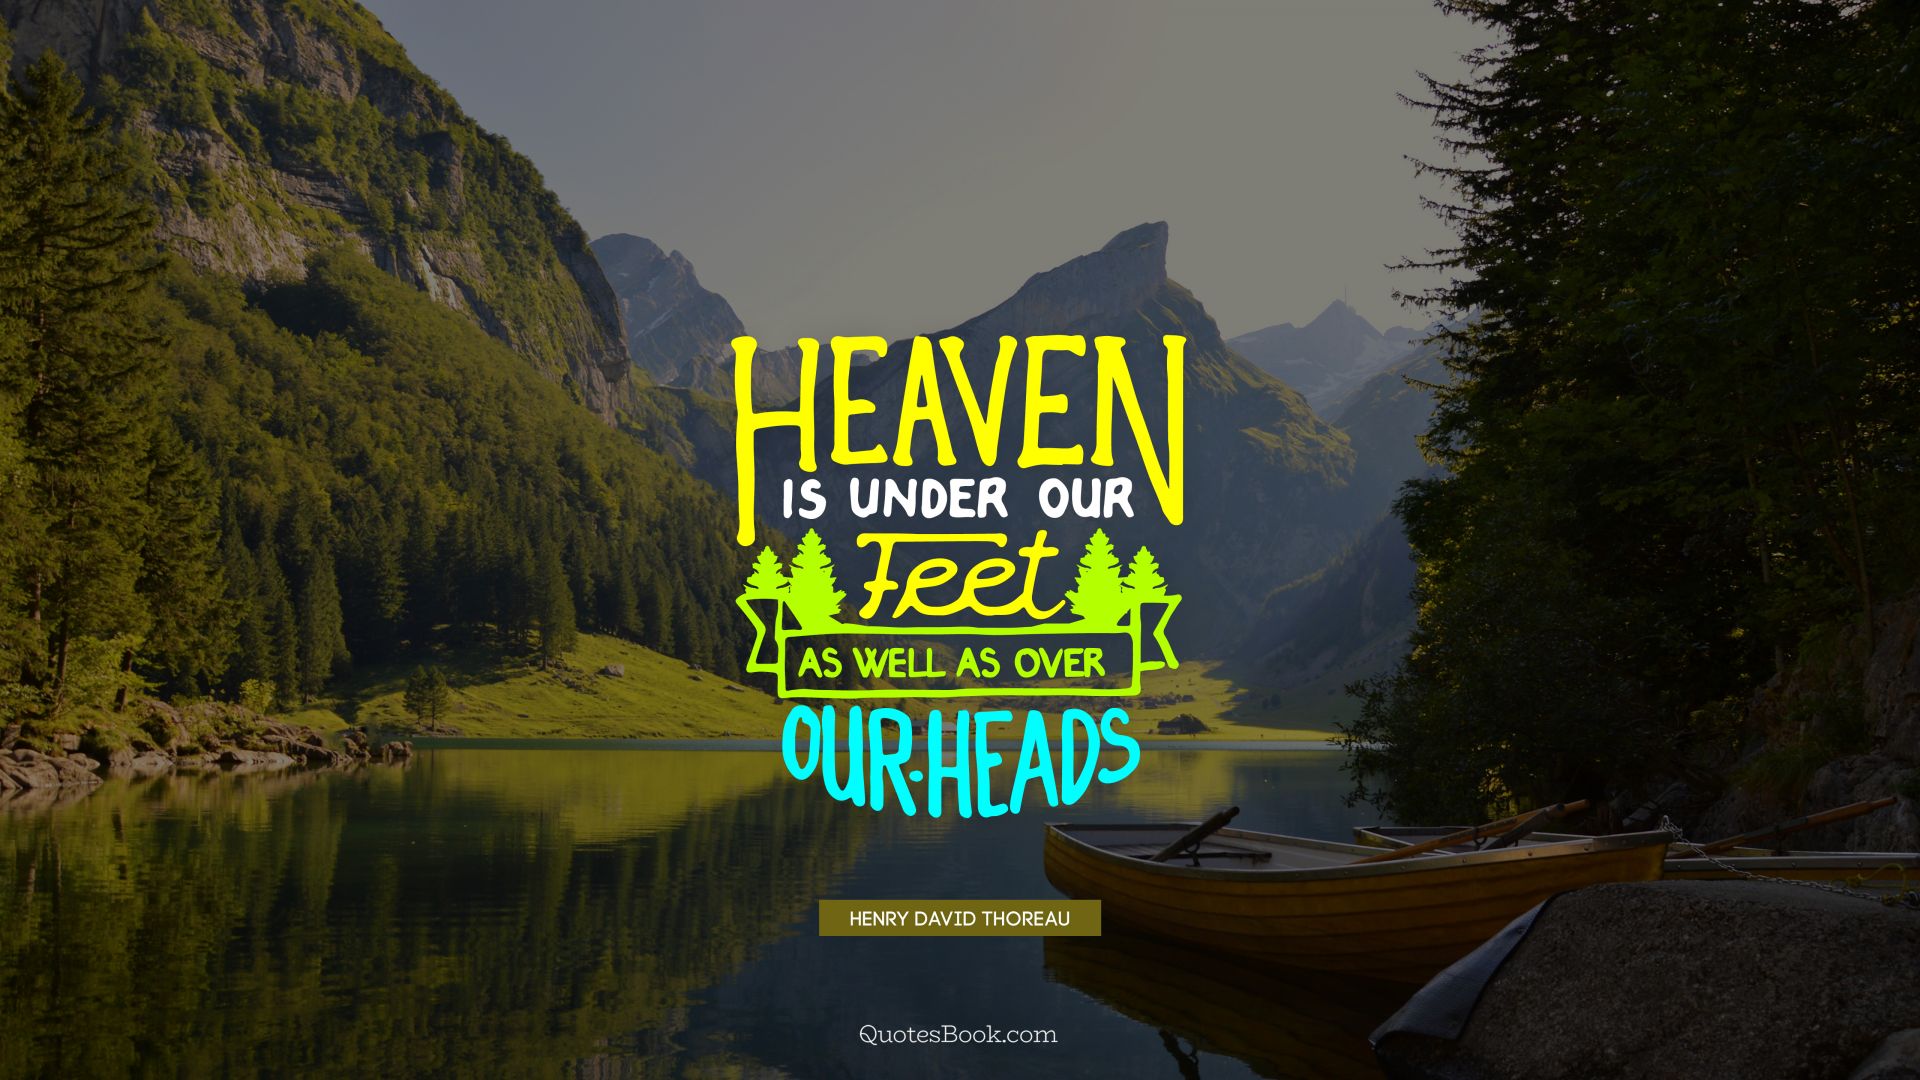 Heaven is under our feet as well as over our heads. - Quote by Henry David Thoreau